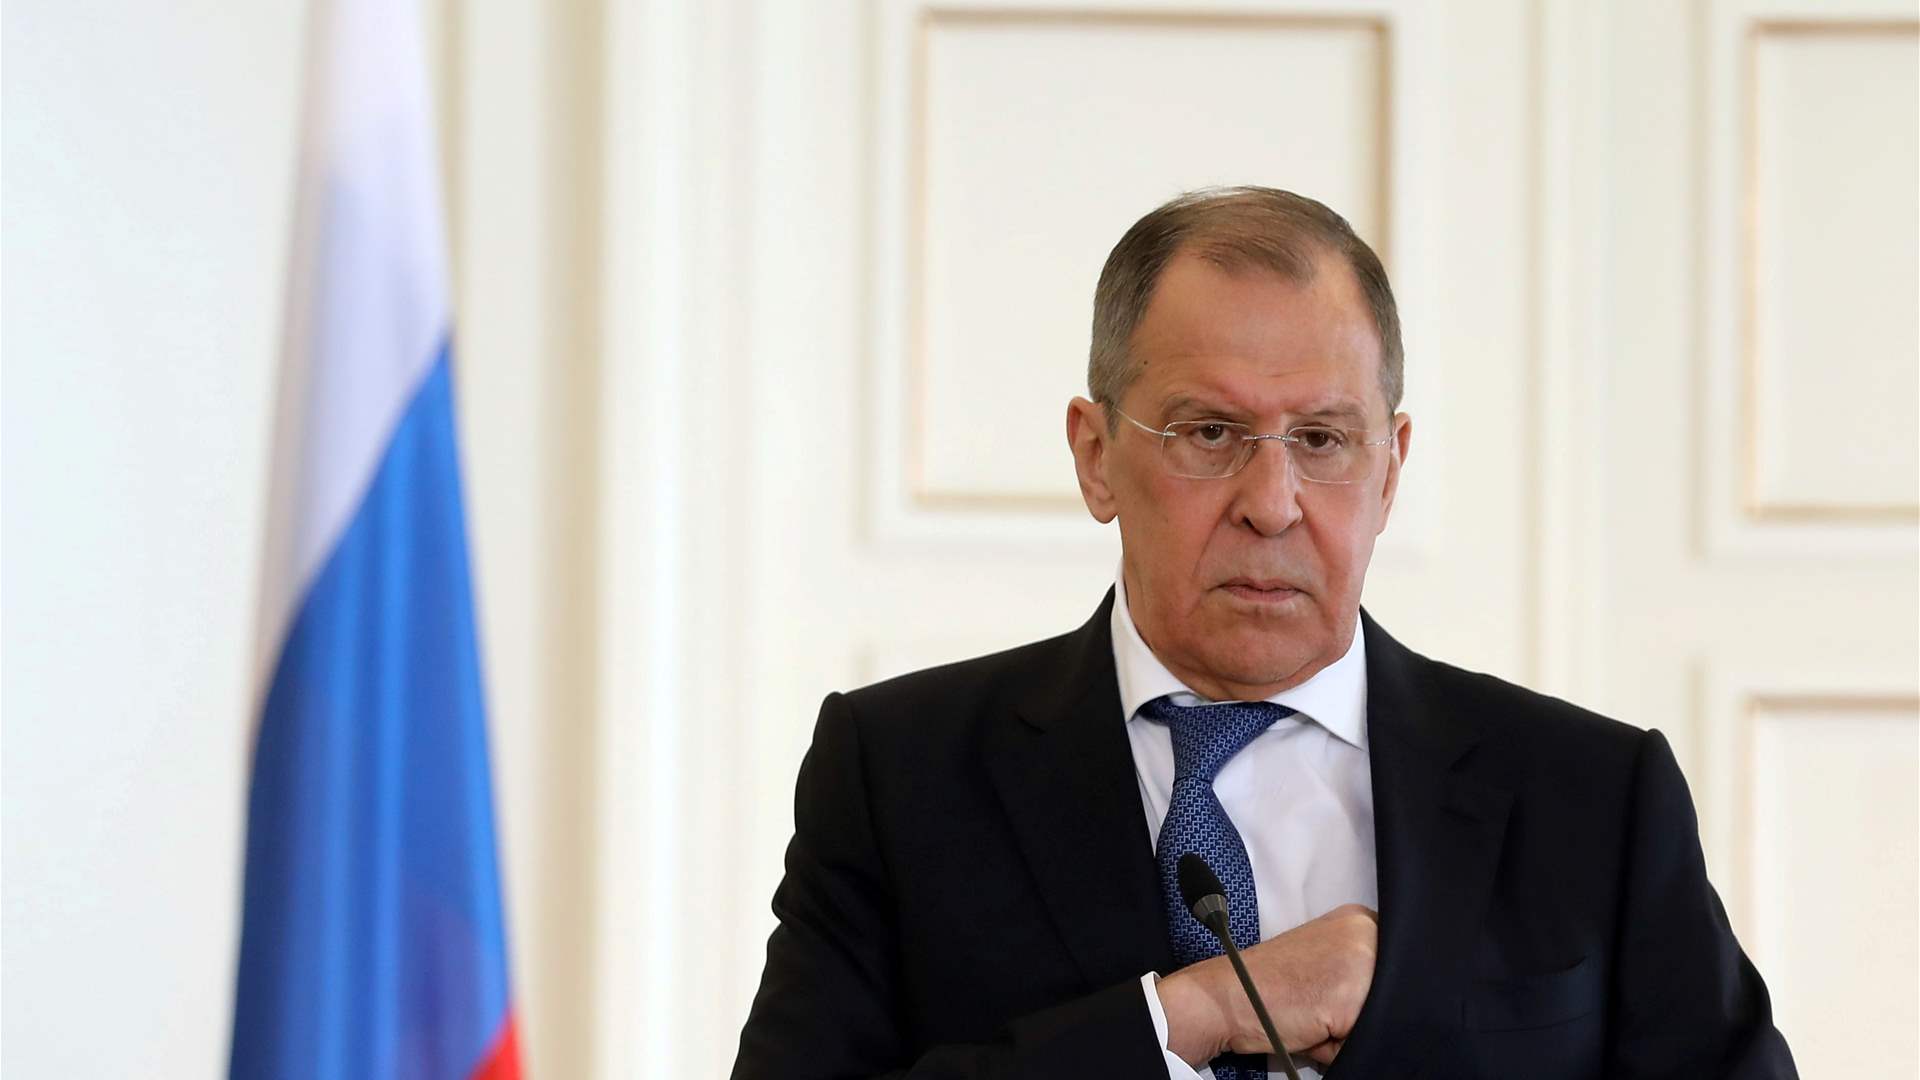 Termination of grain export agreement means withdrawal of security guarantees in Black Sea: Lavrov 